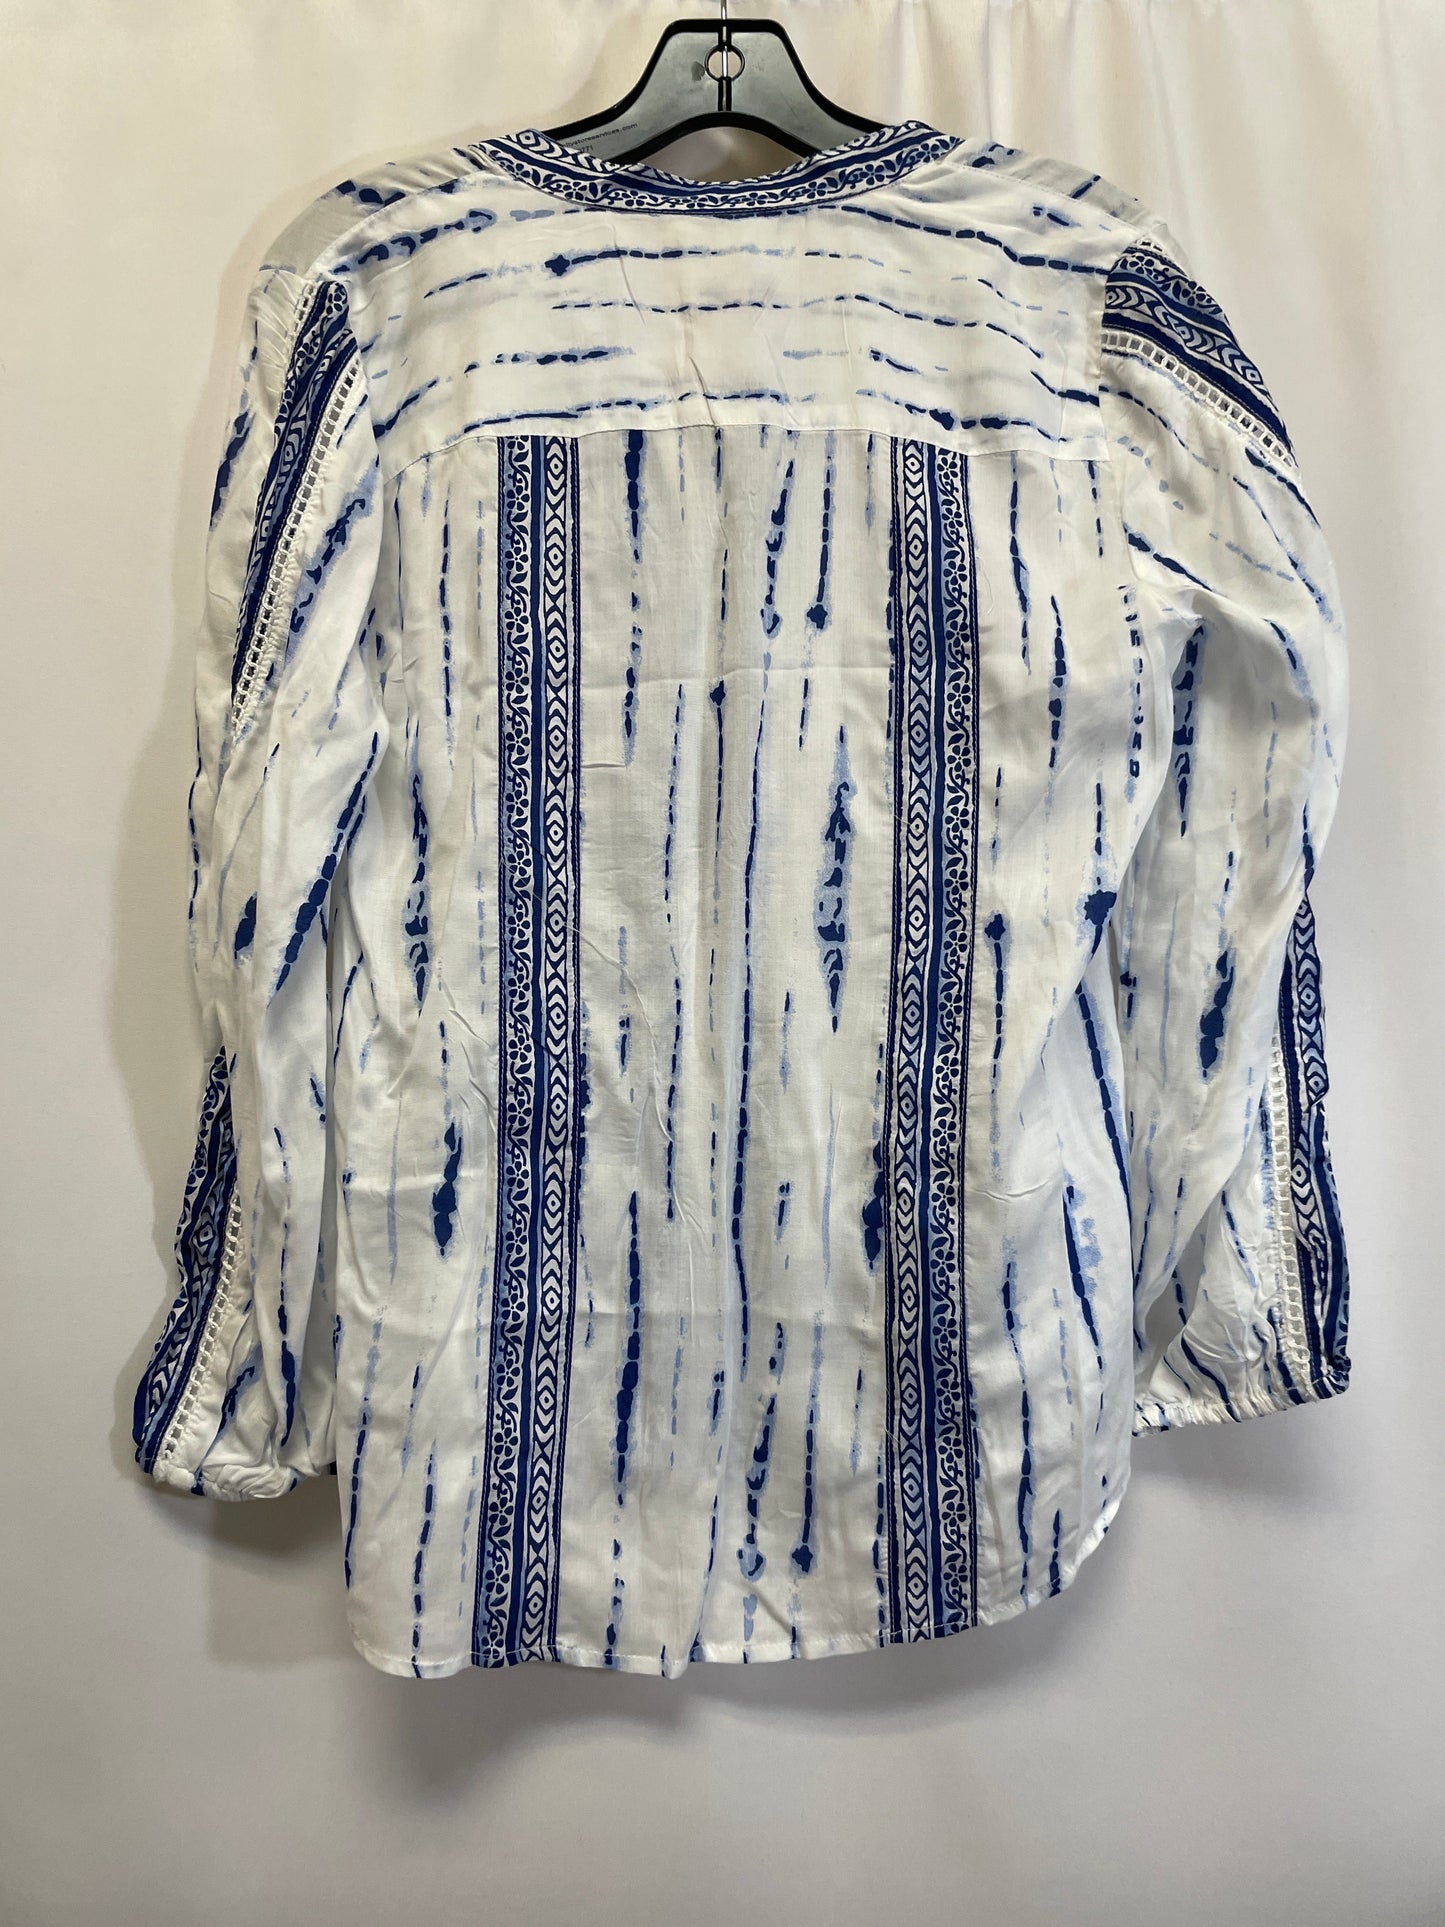 Blue & White Top Long Sleeve Chicos, Size S